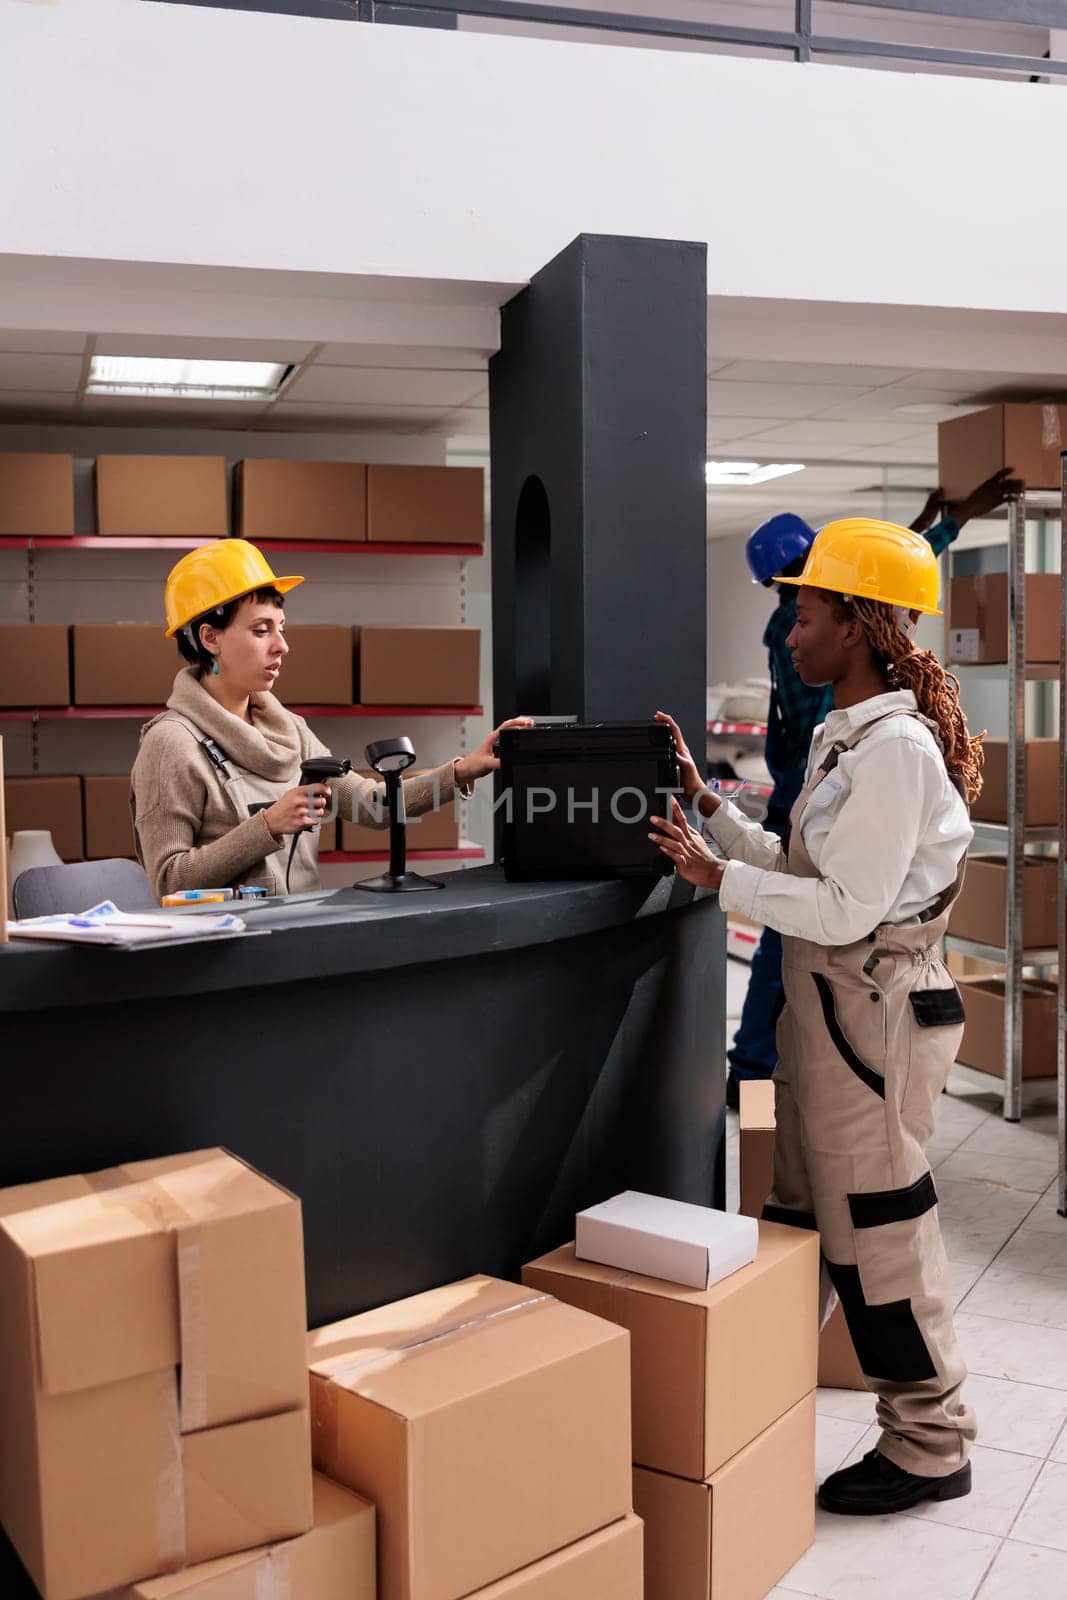 Warehouse manager scanning black case at counter desk and doing inventory. Industrial storehouse coworkers checking stock supply and using barcode scanner at product at delivery office reception